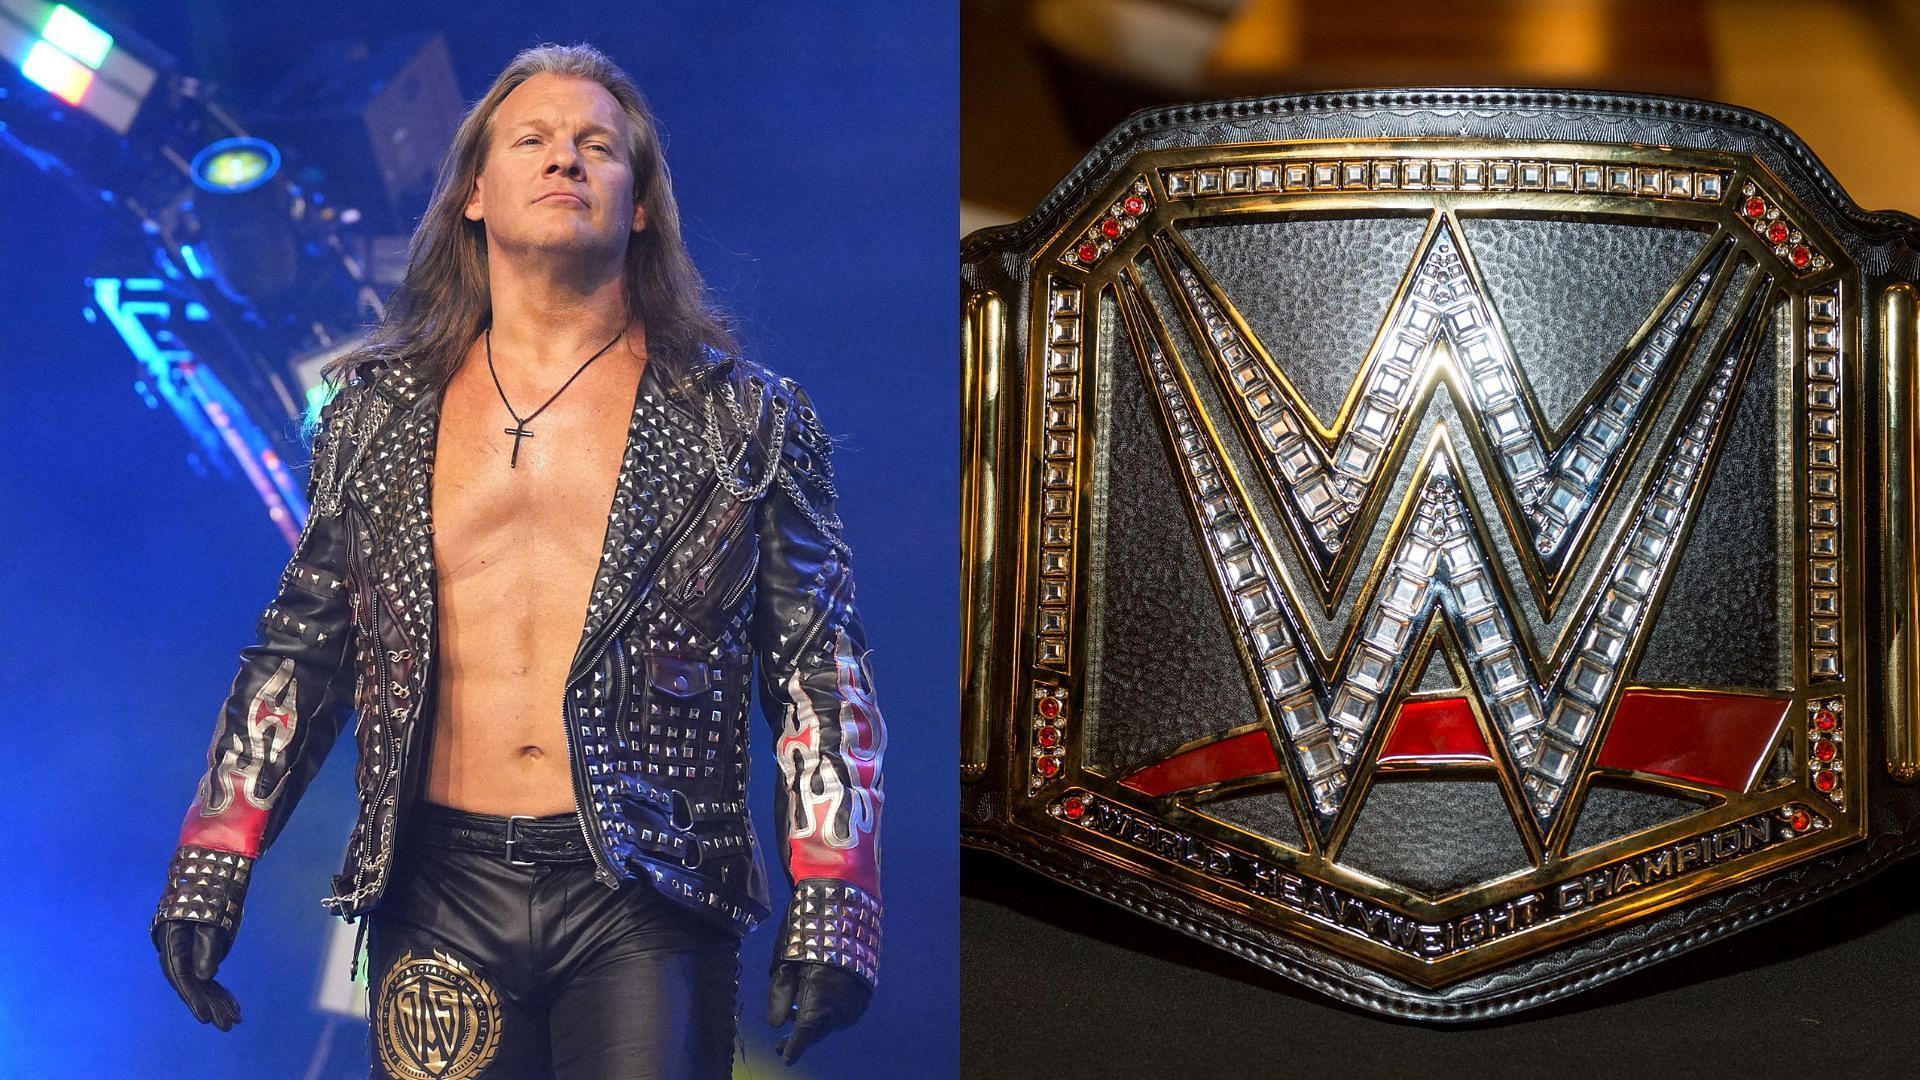 Chris Jericho has won championships in WWE and AEW.